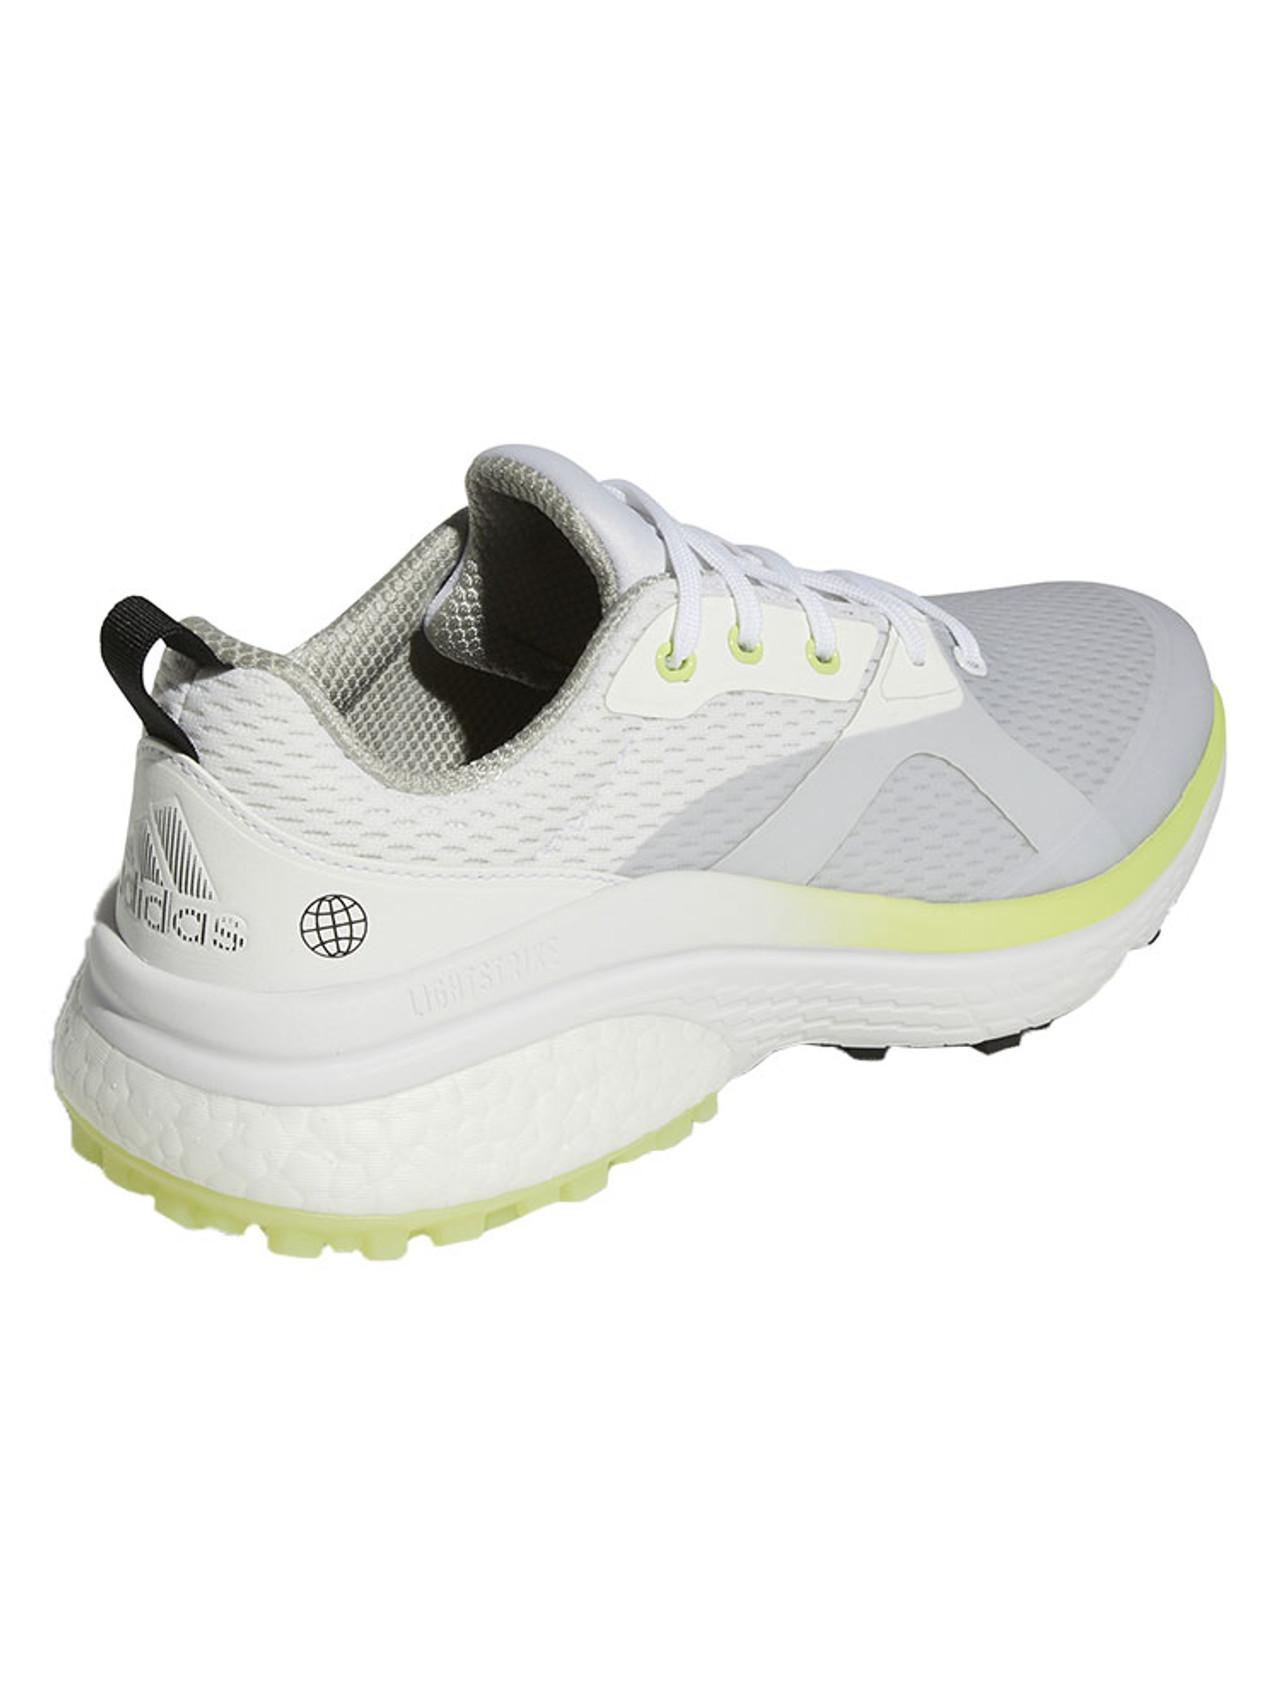 adidas Solarmotion Golf Shoes - FTWR White/Core Black/Pulse Lime | GolfBox